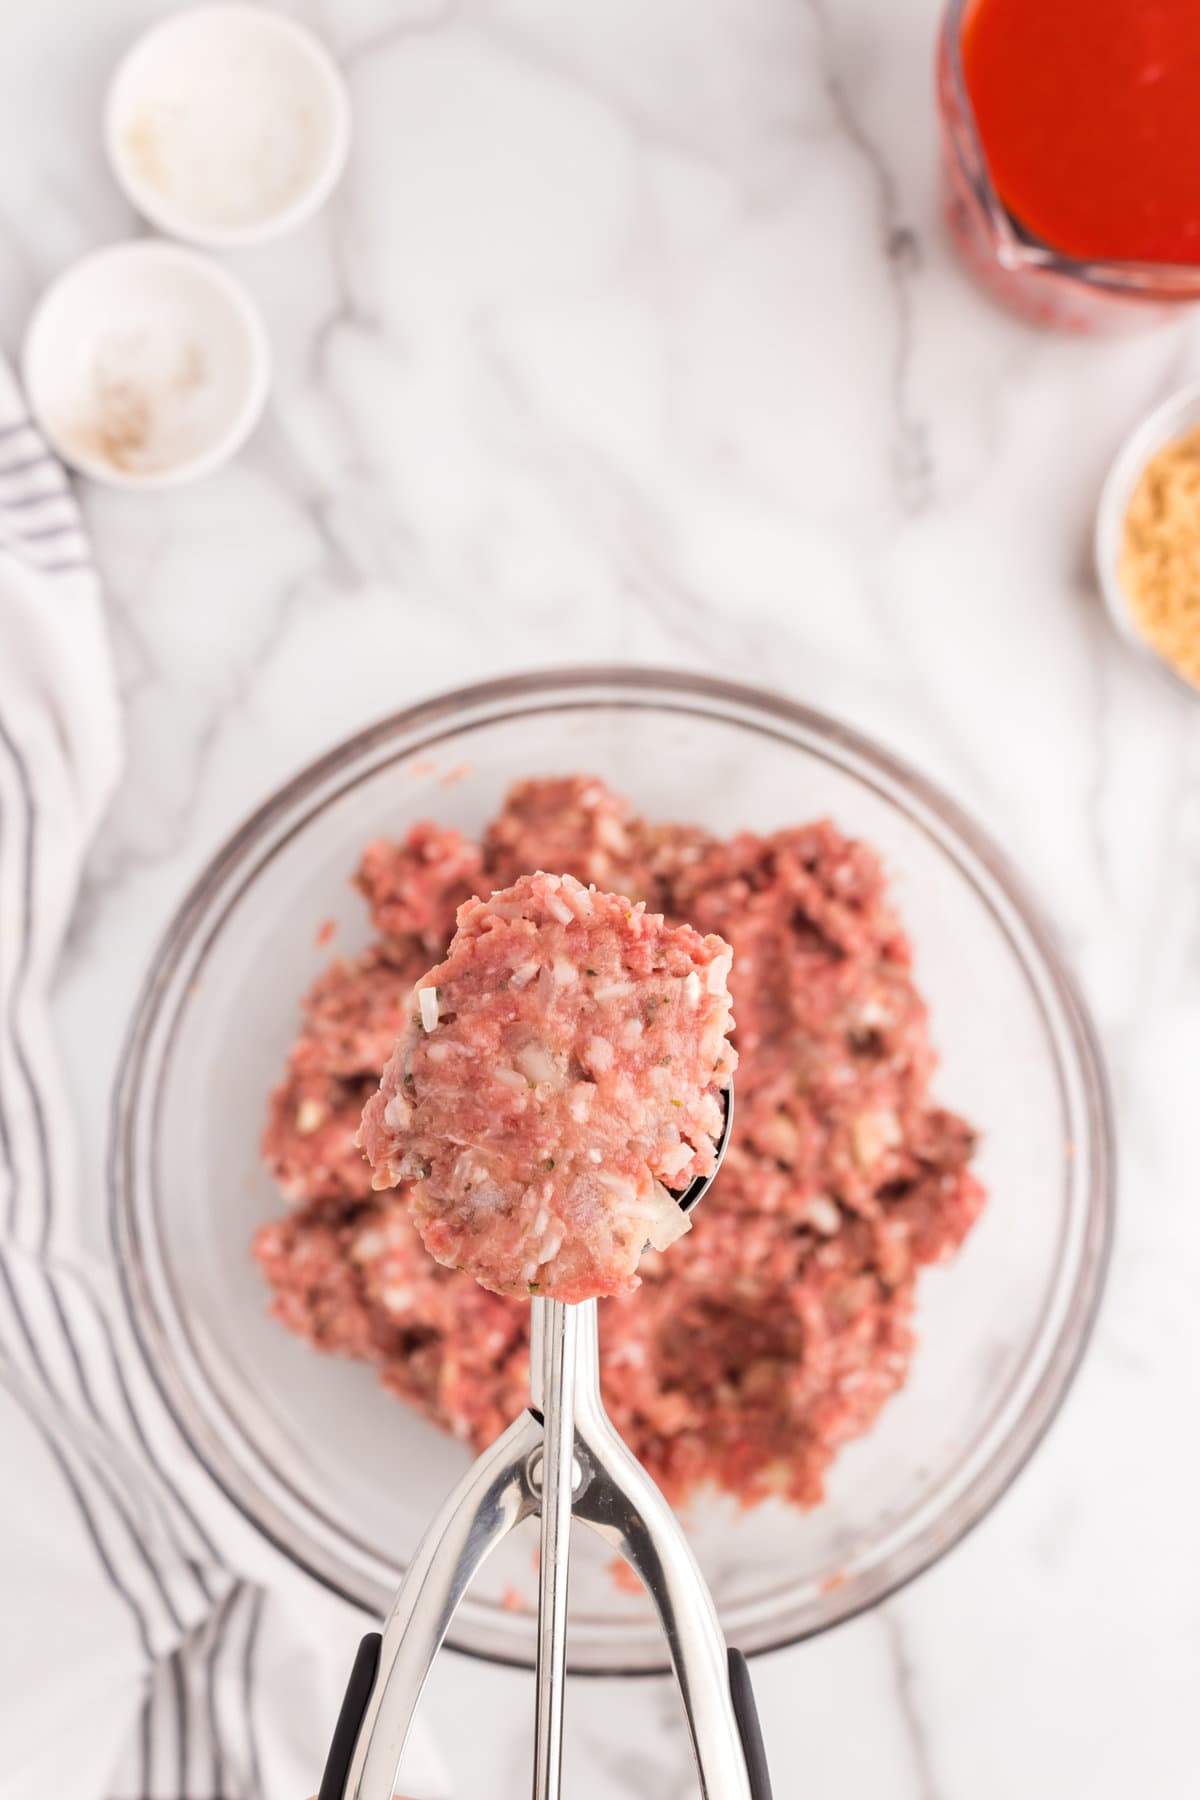 Using a scooper to scoop meatball mixture for Porcupine Meatballs recipe